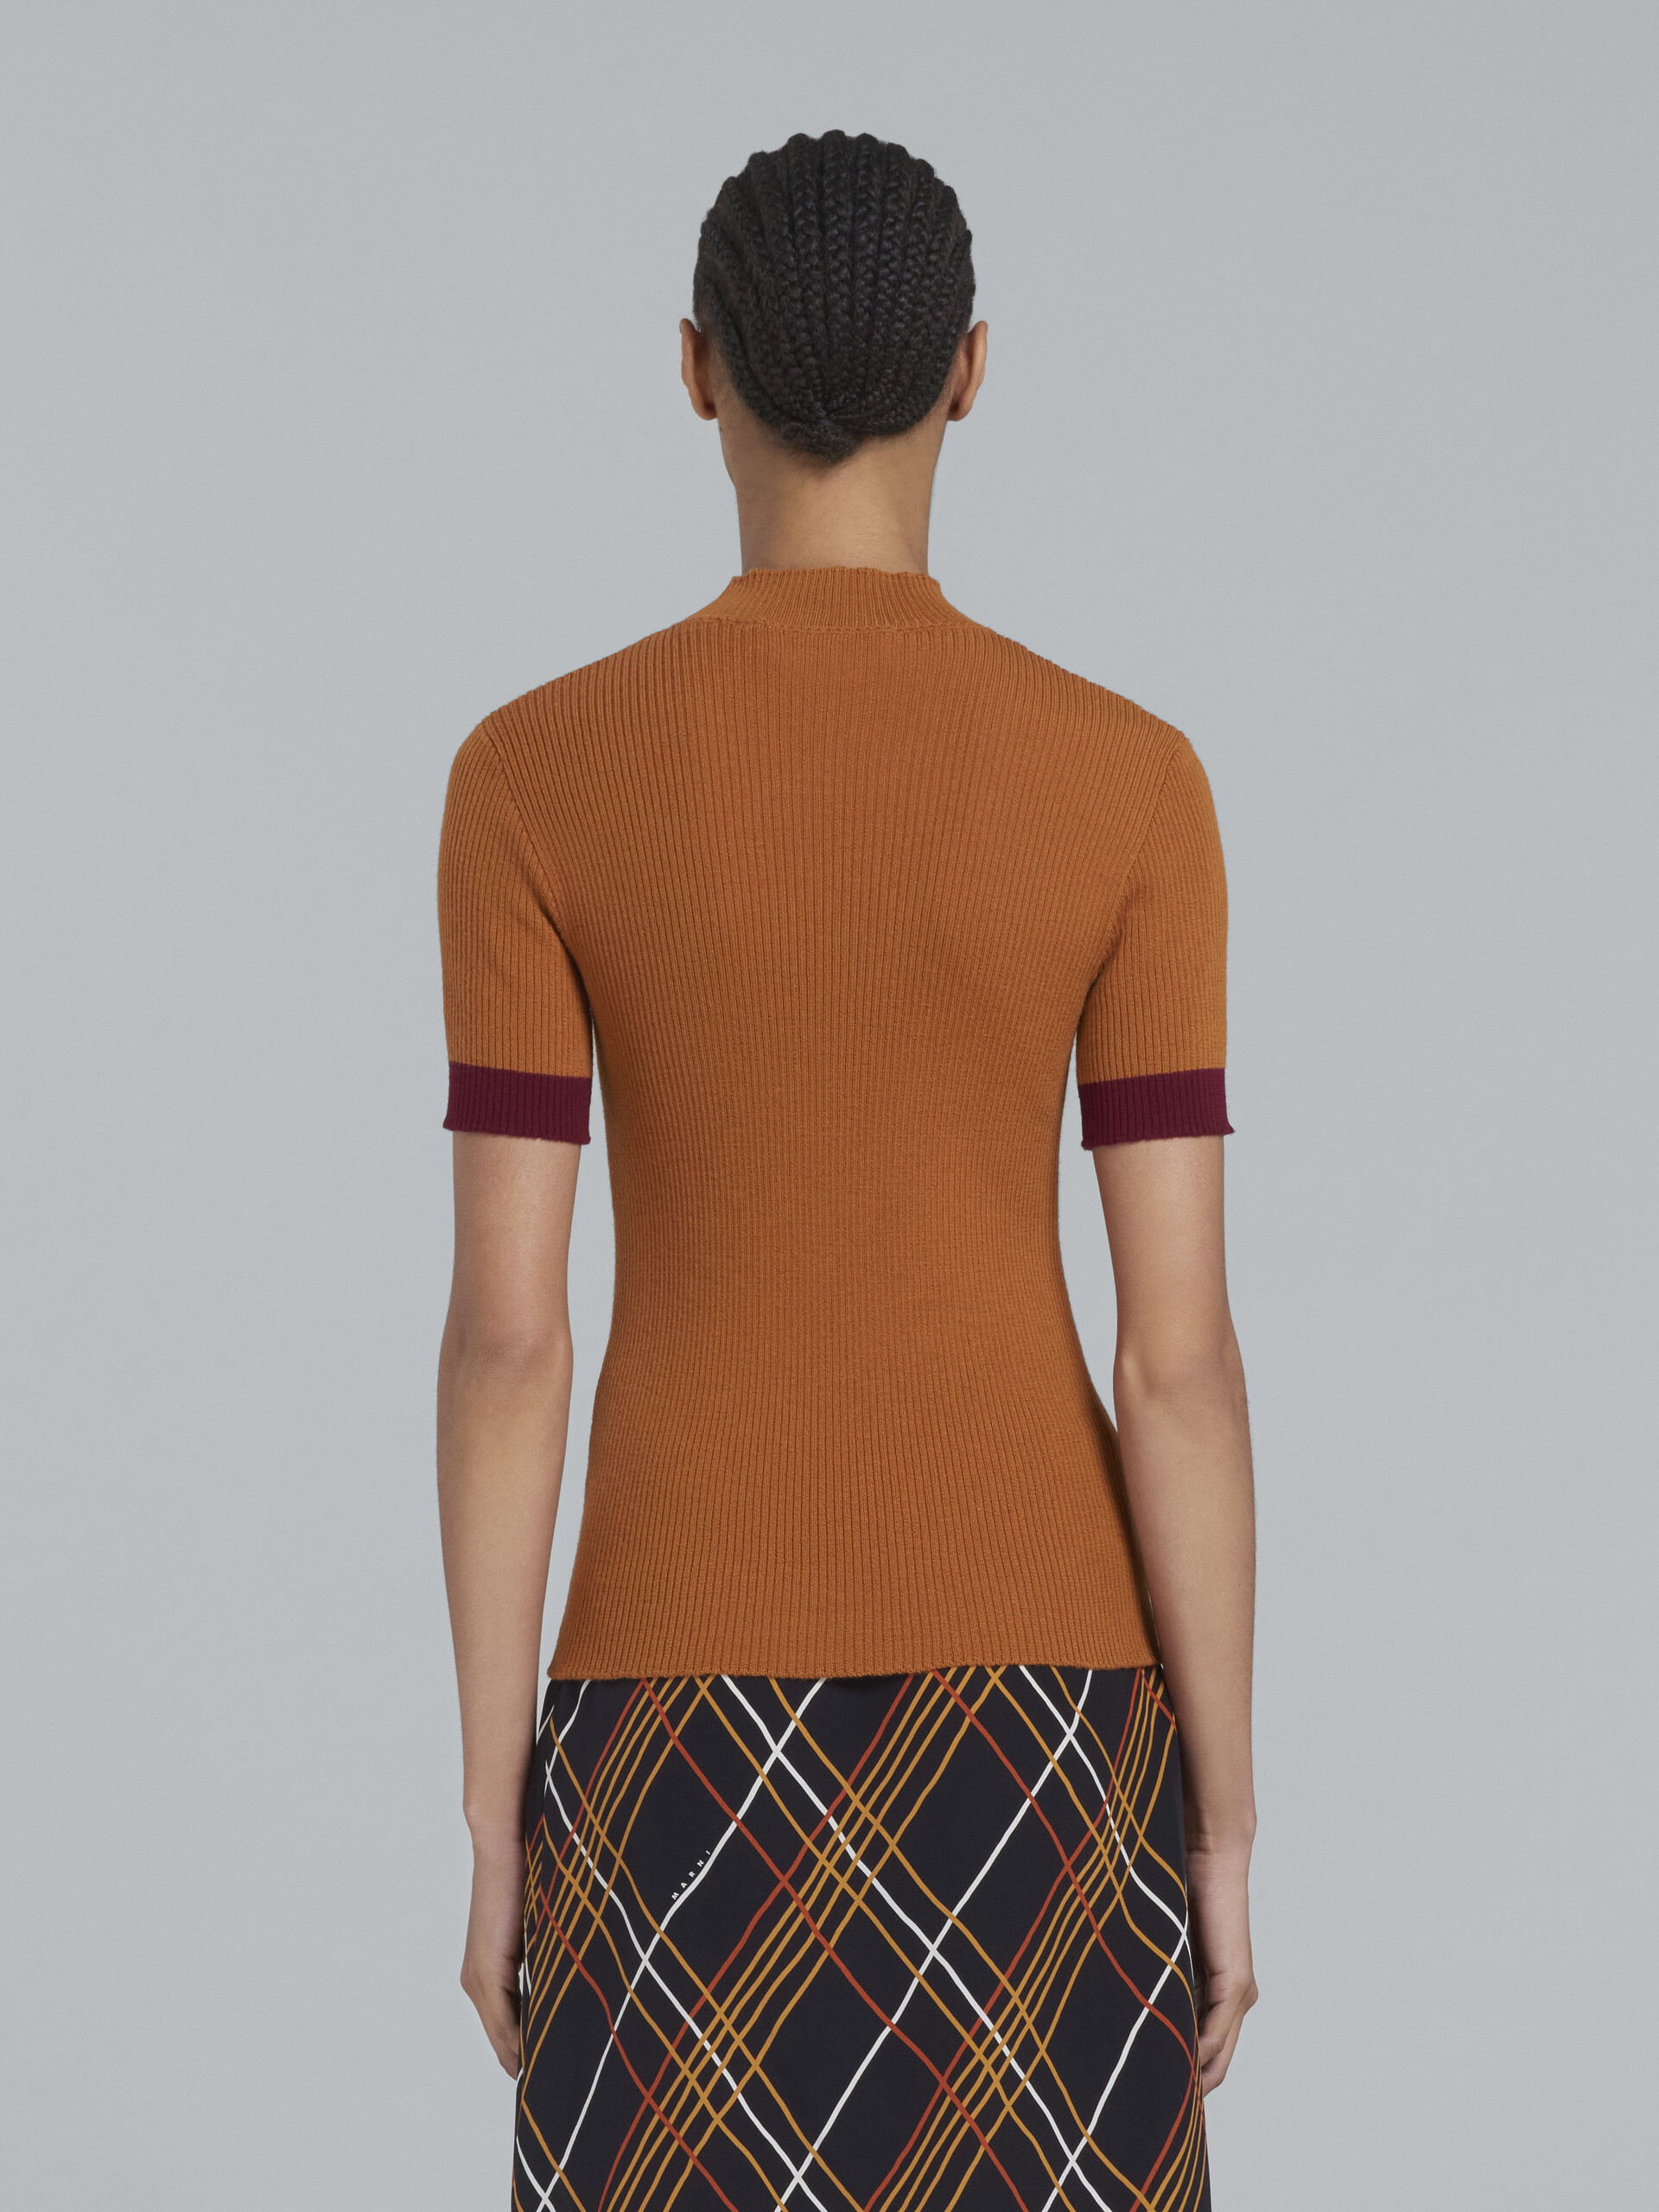 Orange wool turtleneck with contrasting cuffs - Pullovers - Image 3